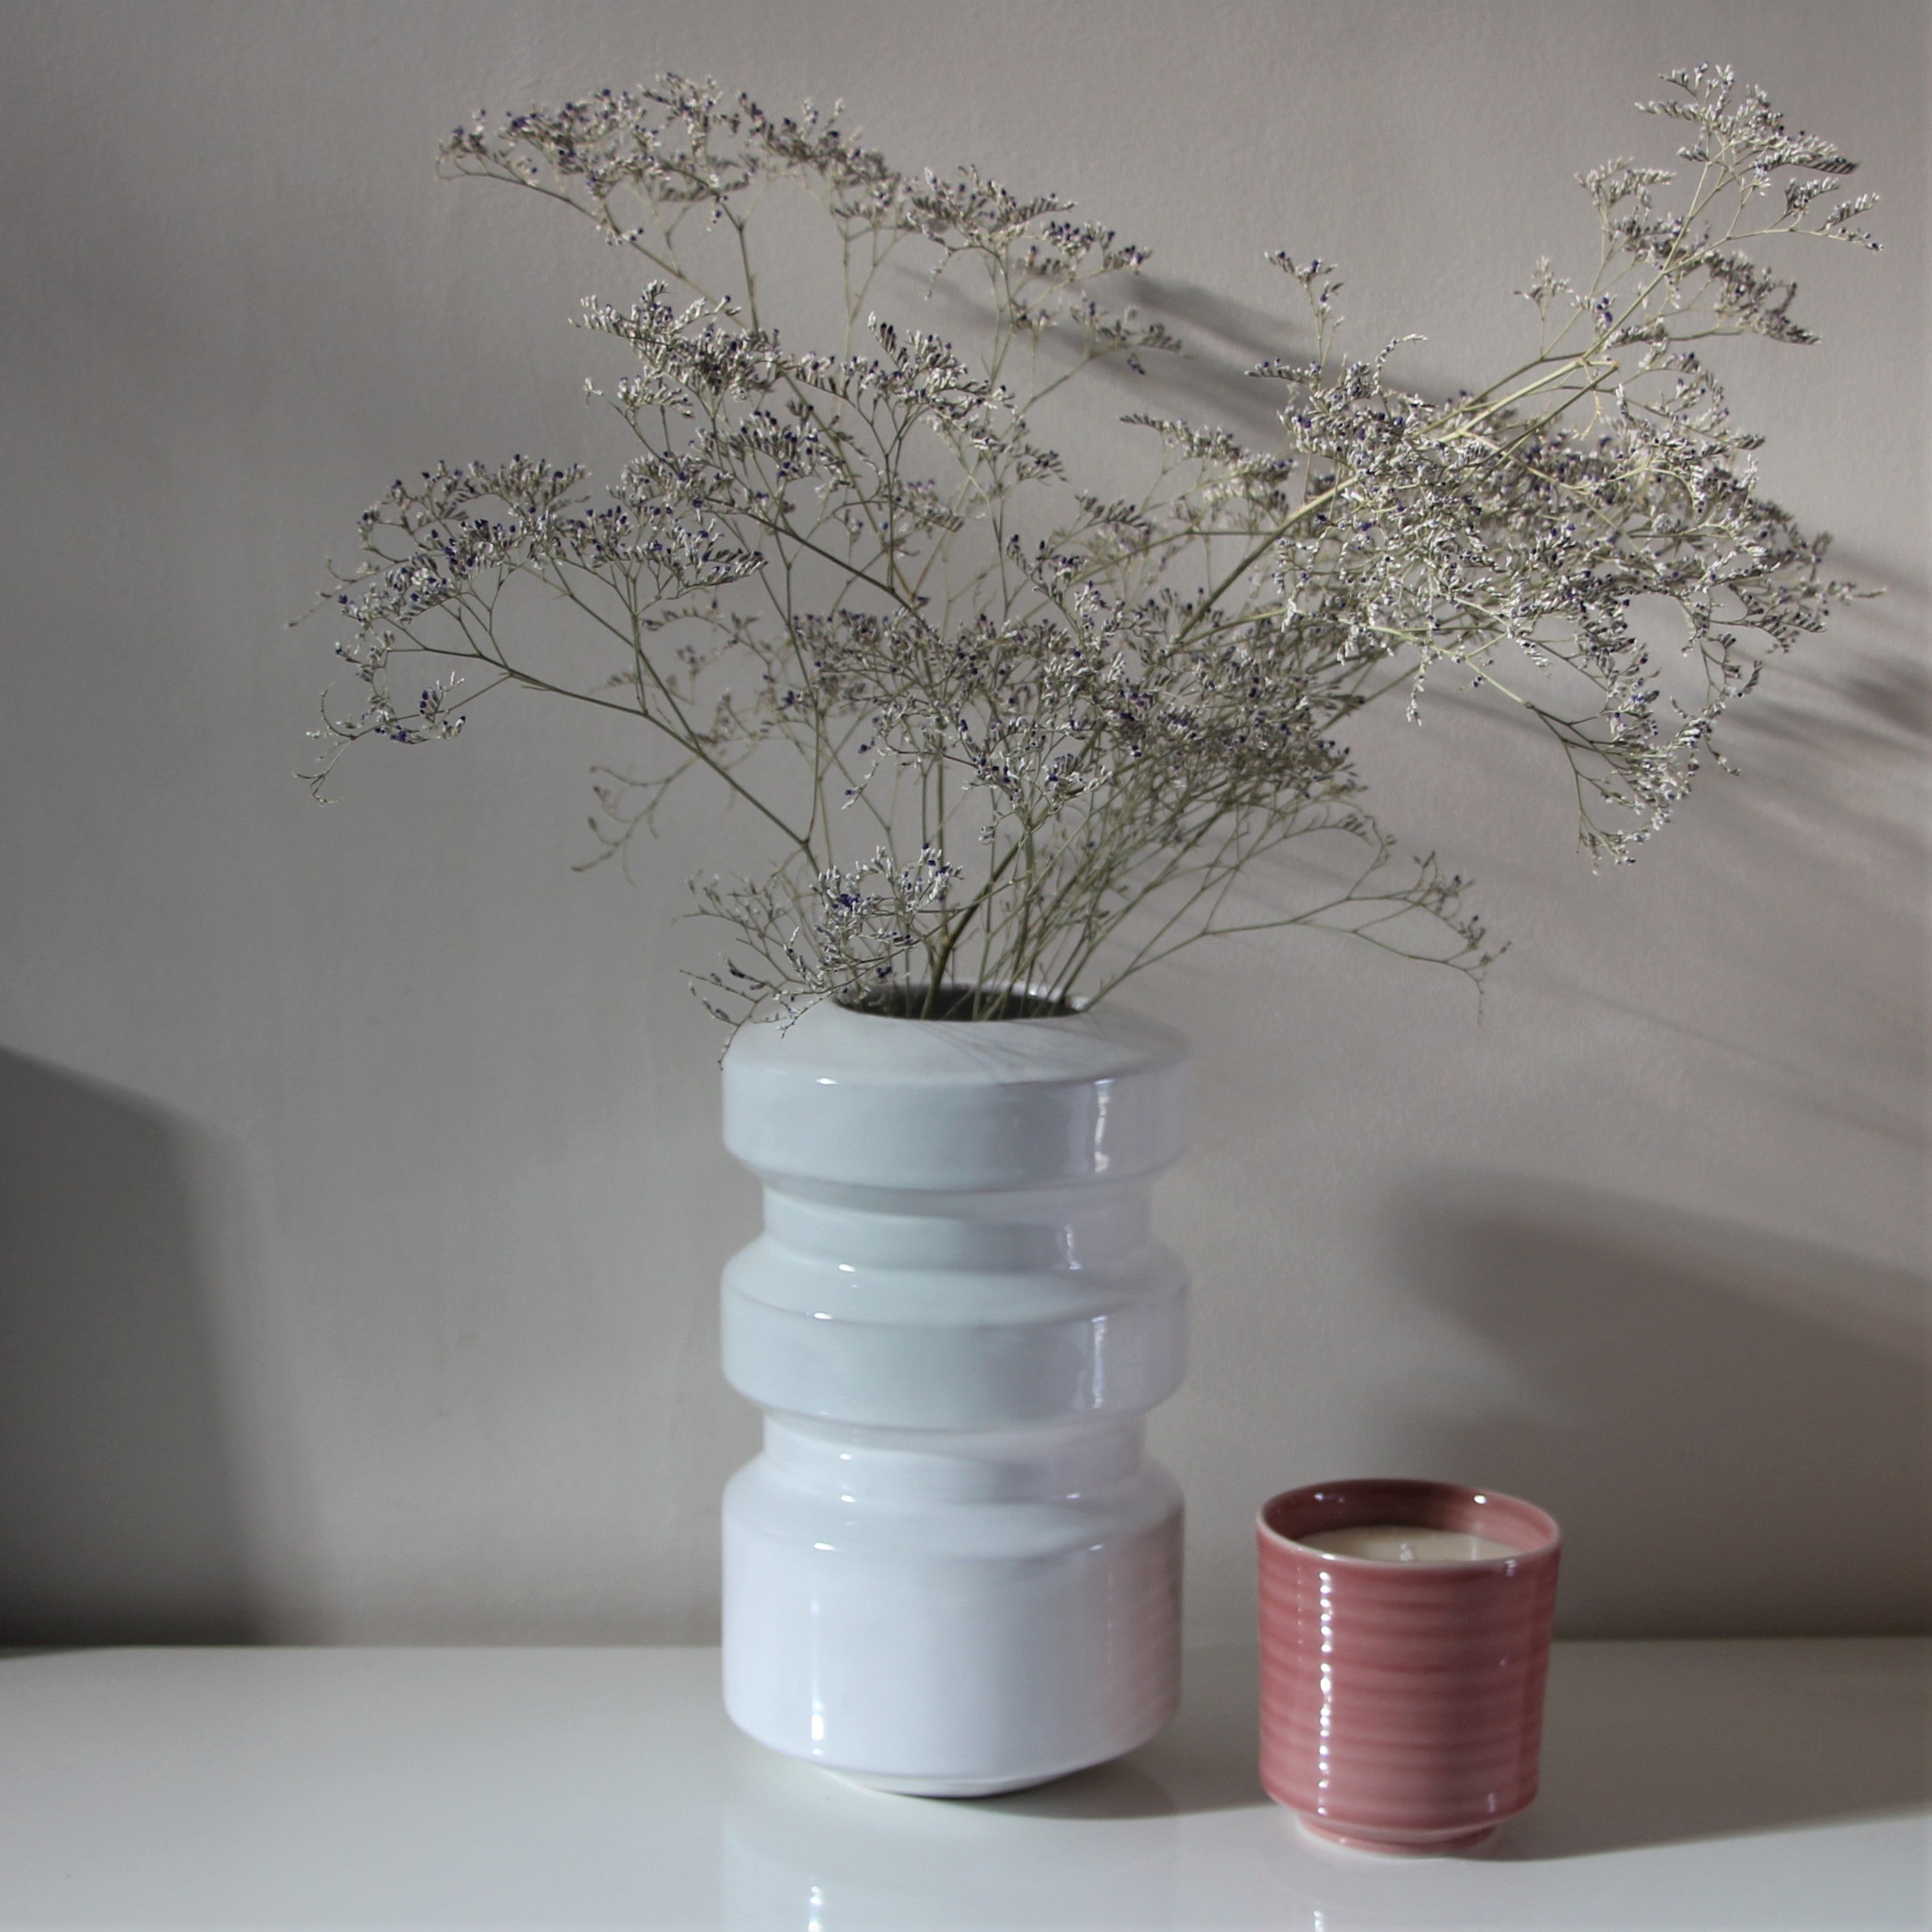 Istouti Vase hand made by Clément BOUTILLON, made in France